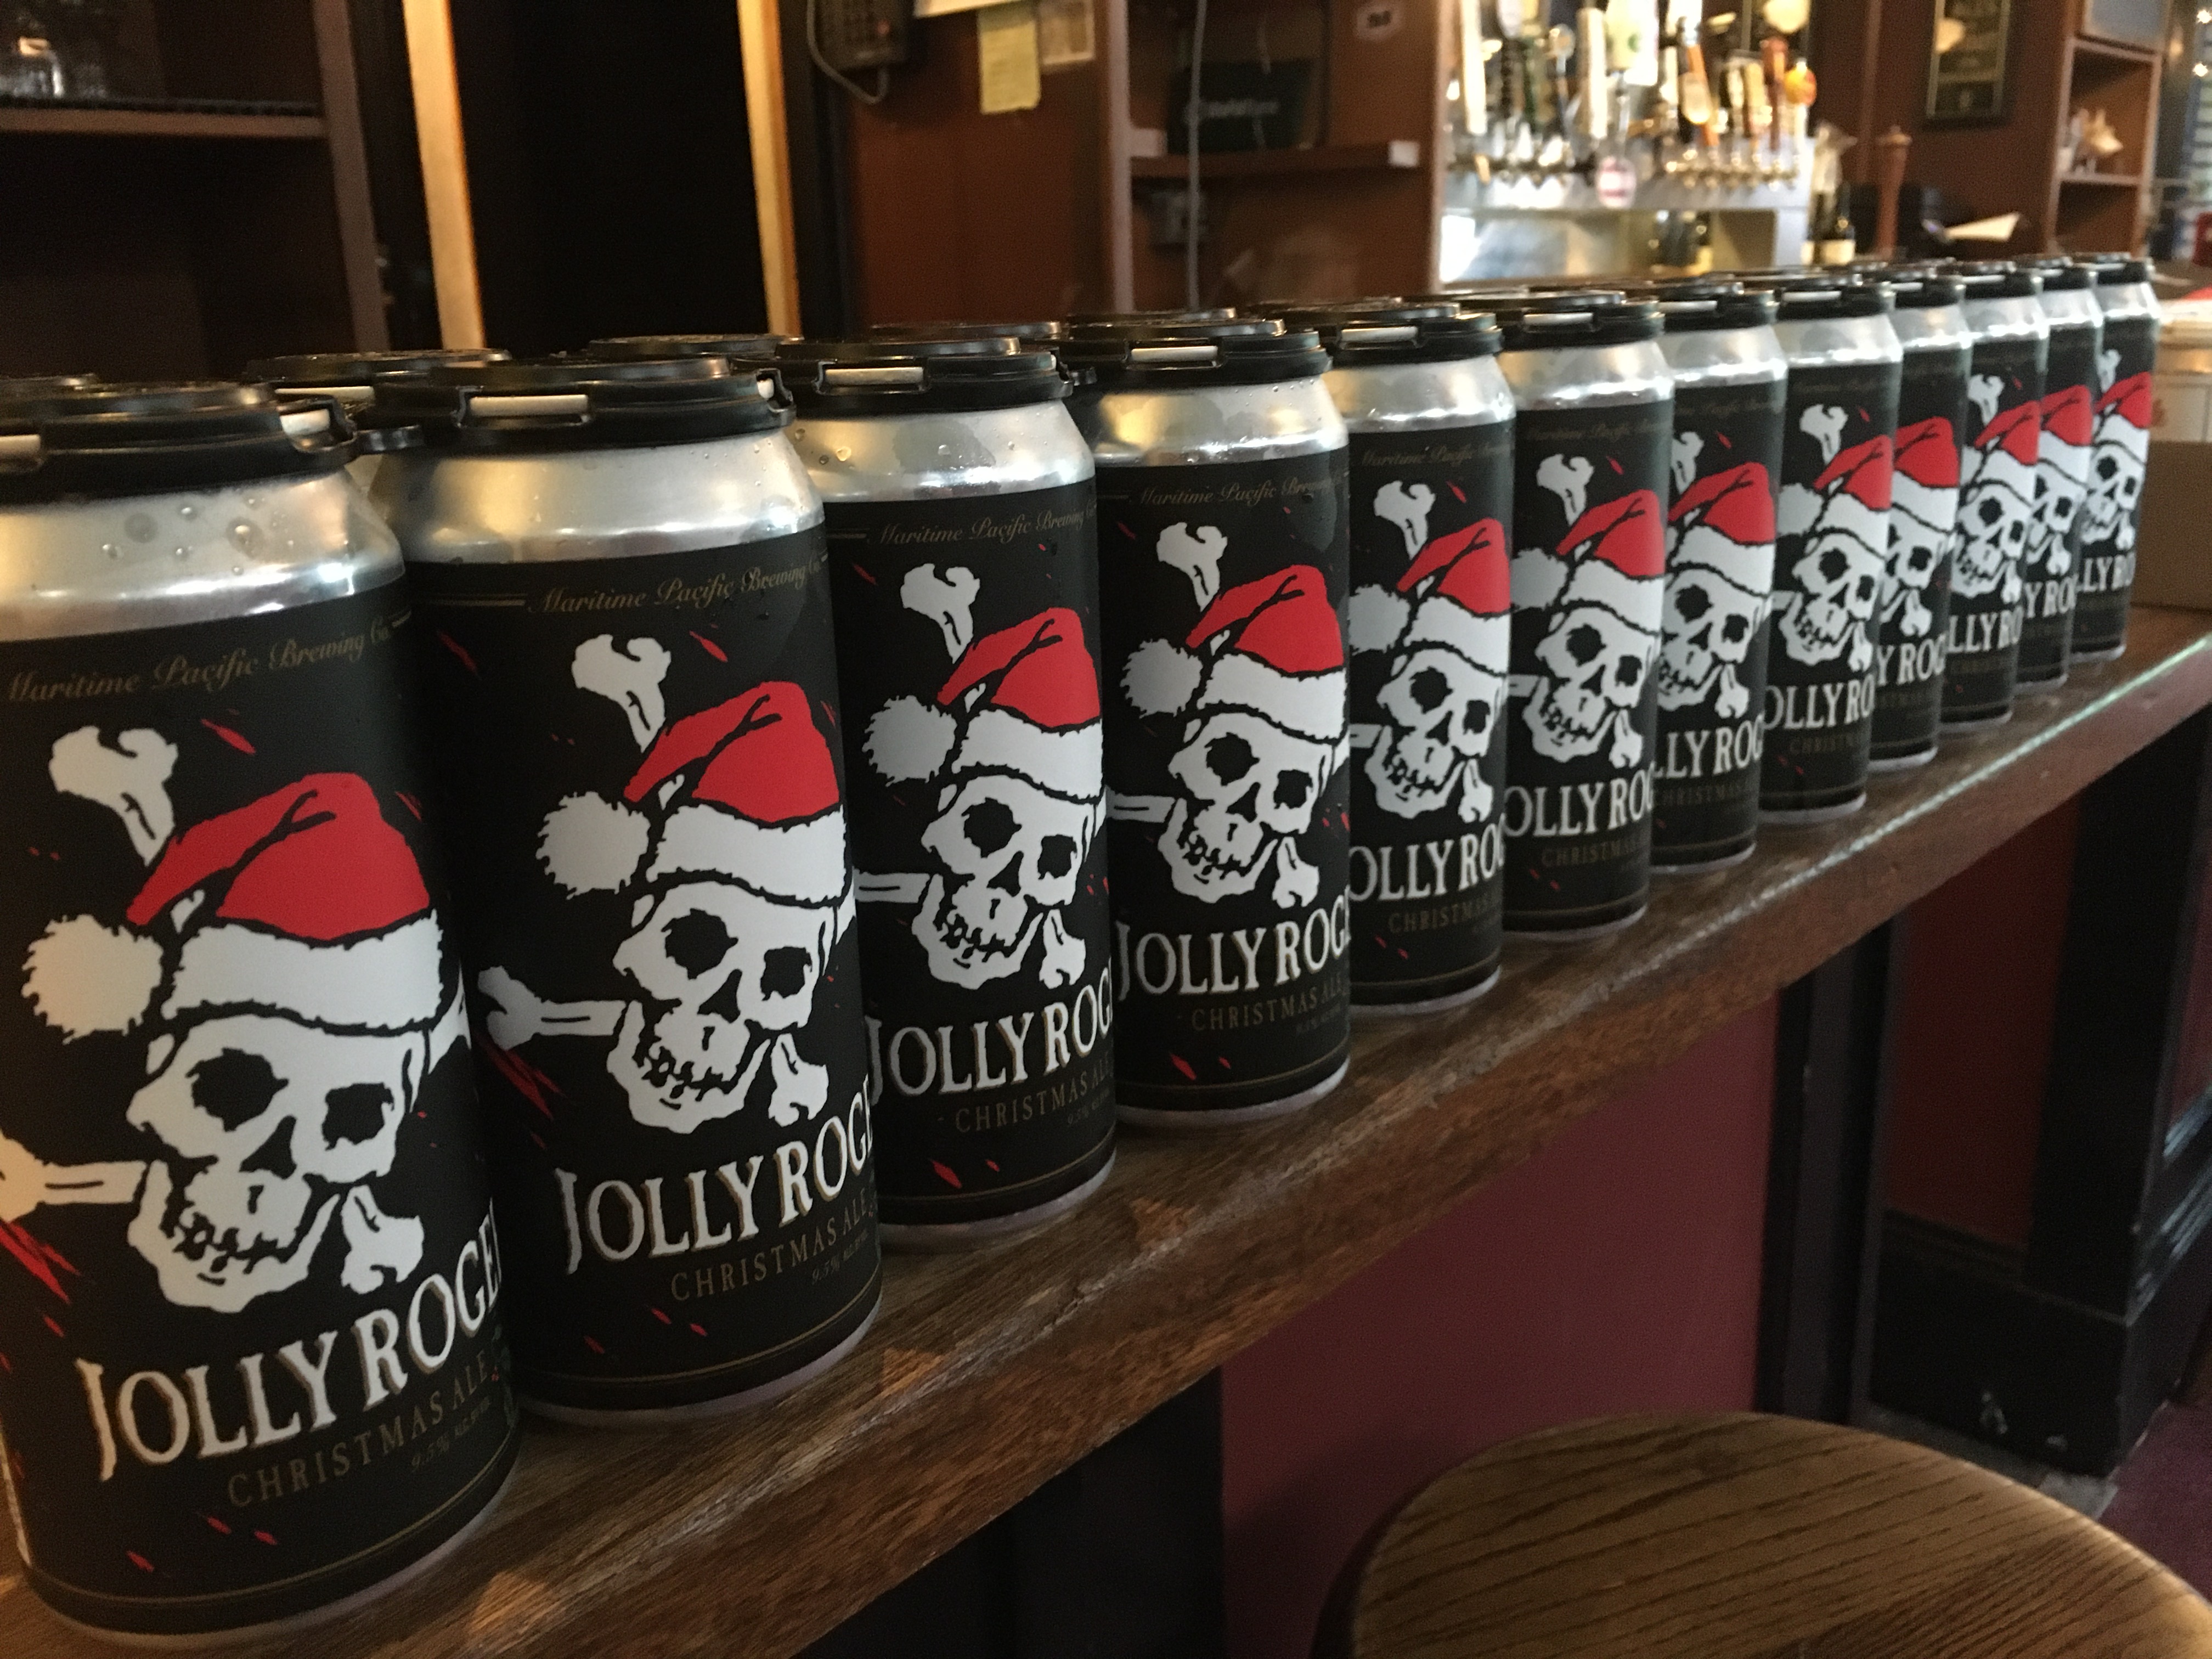 Tis' the season for Maritime Brewing's Jolly Roger winter ale.